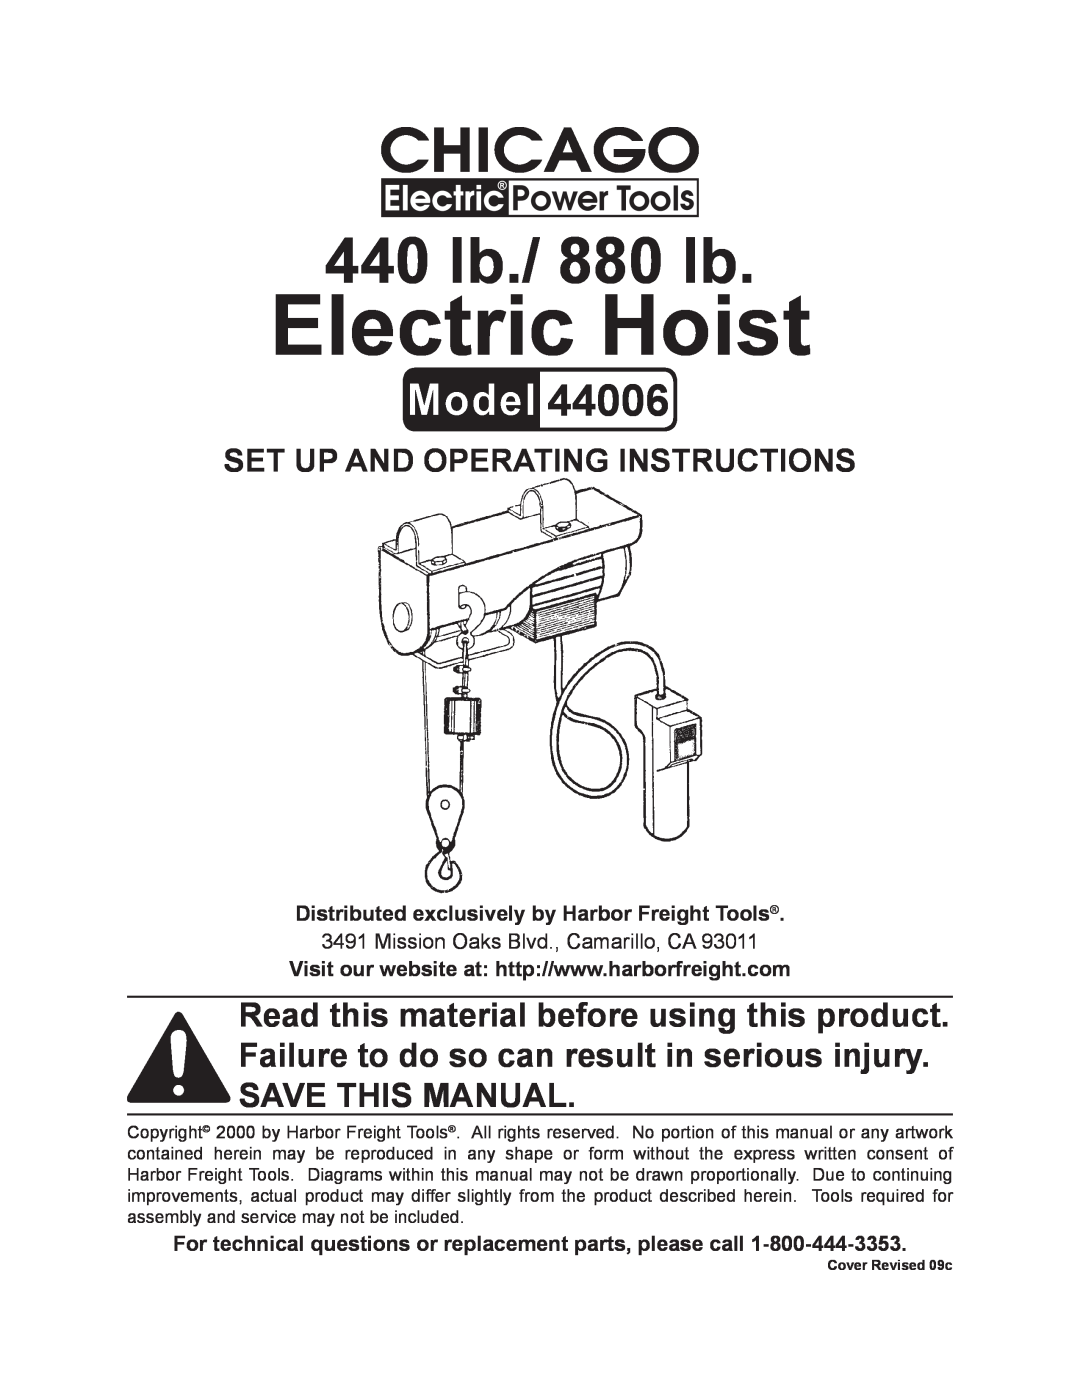 Chicago Electric 44006 operating instructions Set Up And Operating Instructions, Electric Hoist, 440 lb./ 880 lb 